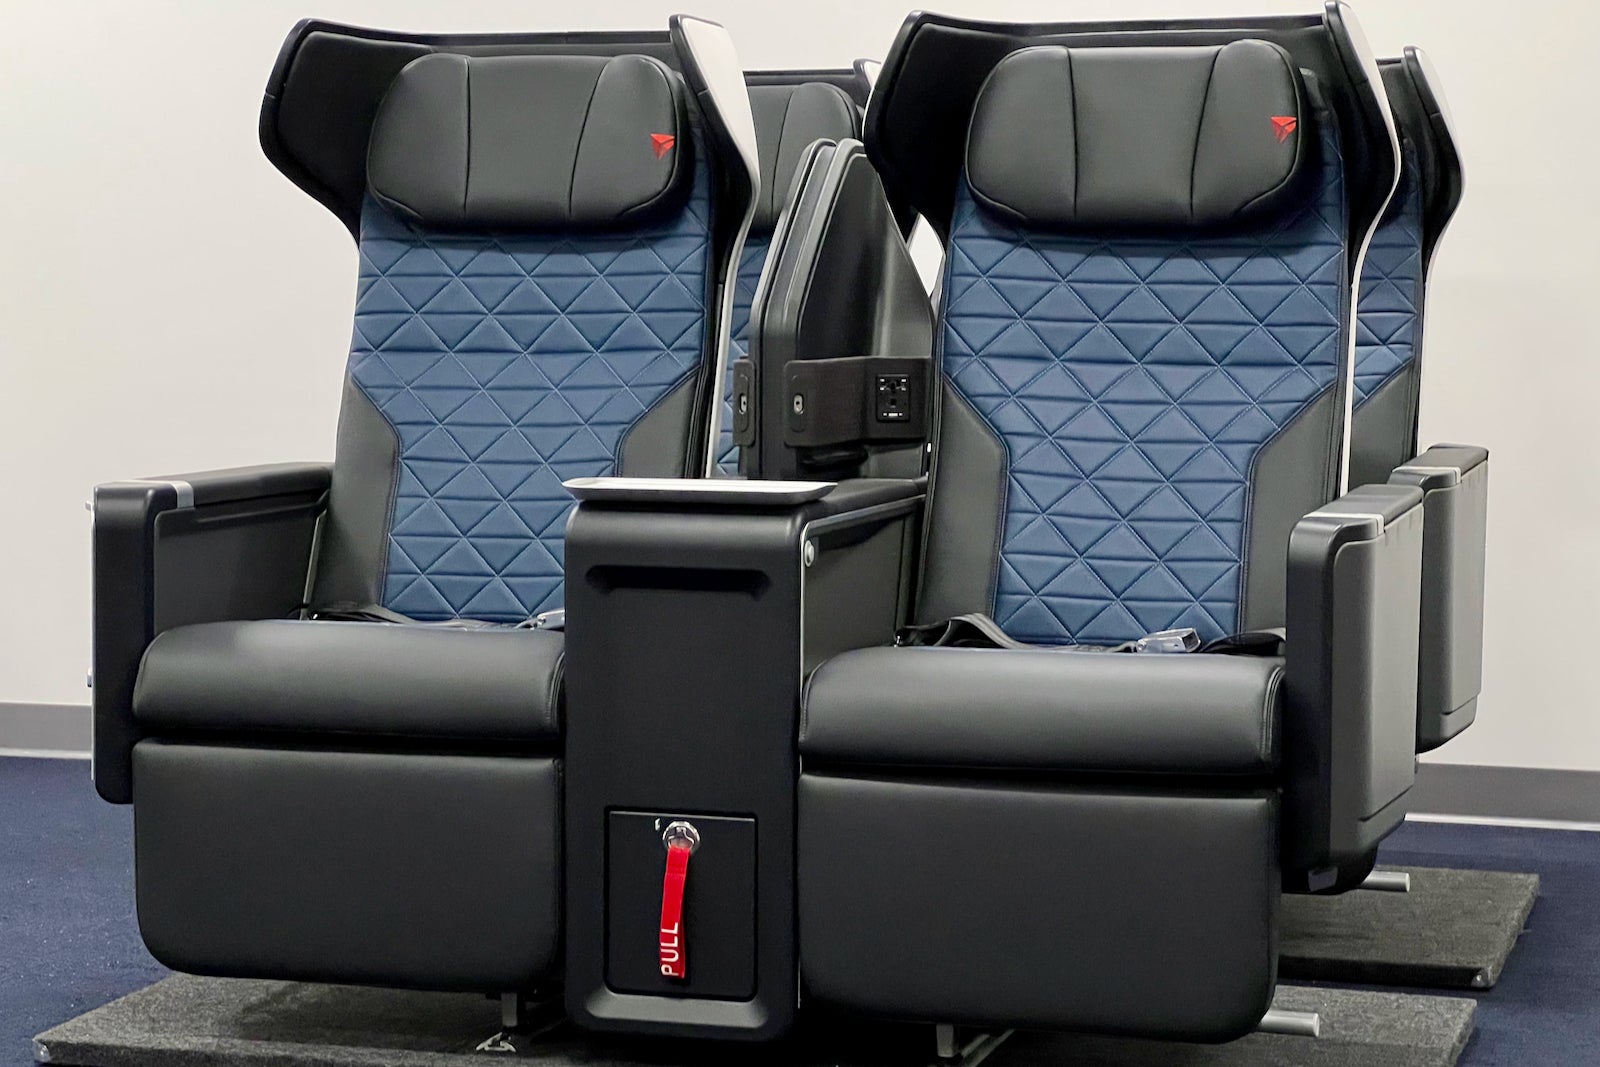 delta's futuristic first-class recliners are coming to the boeing 737